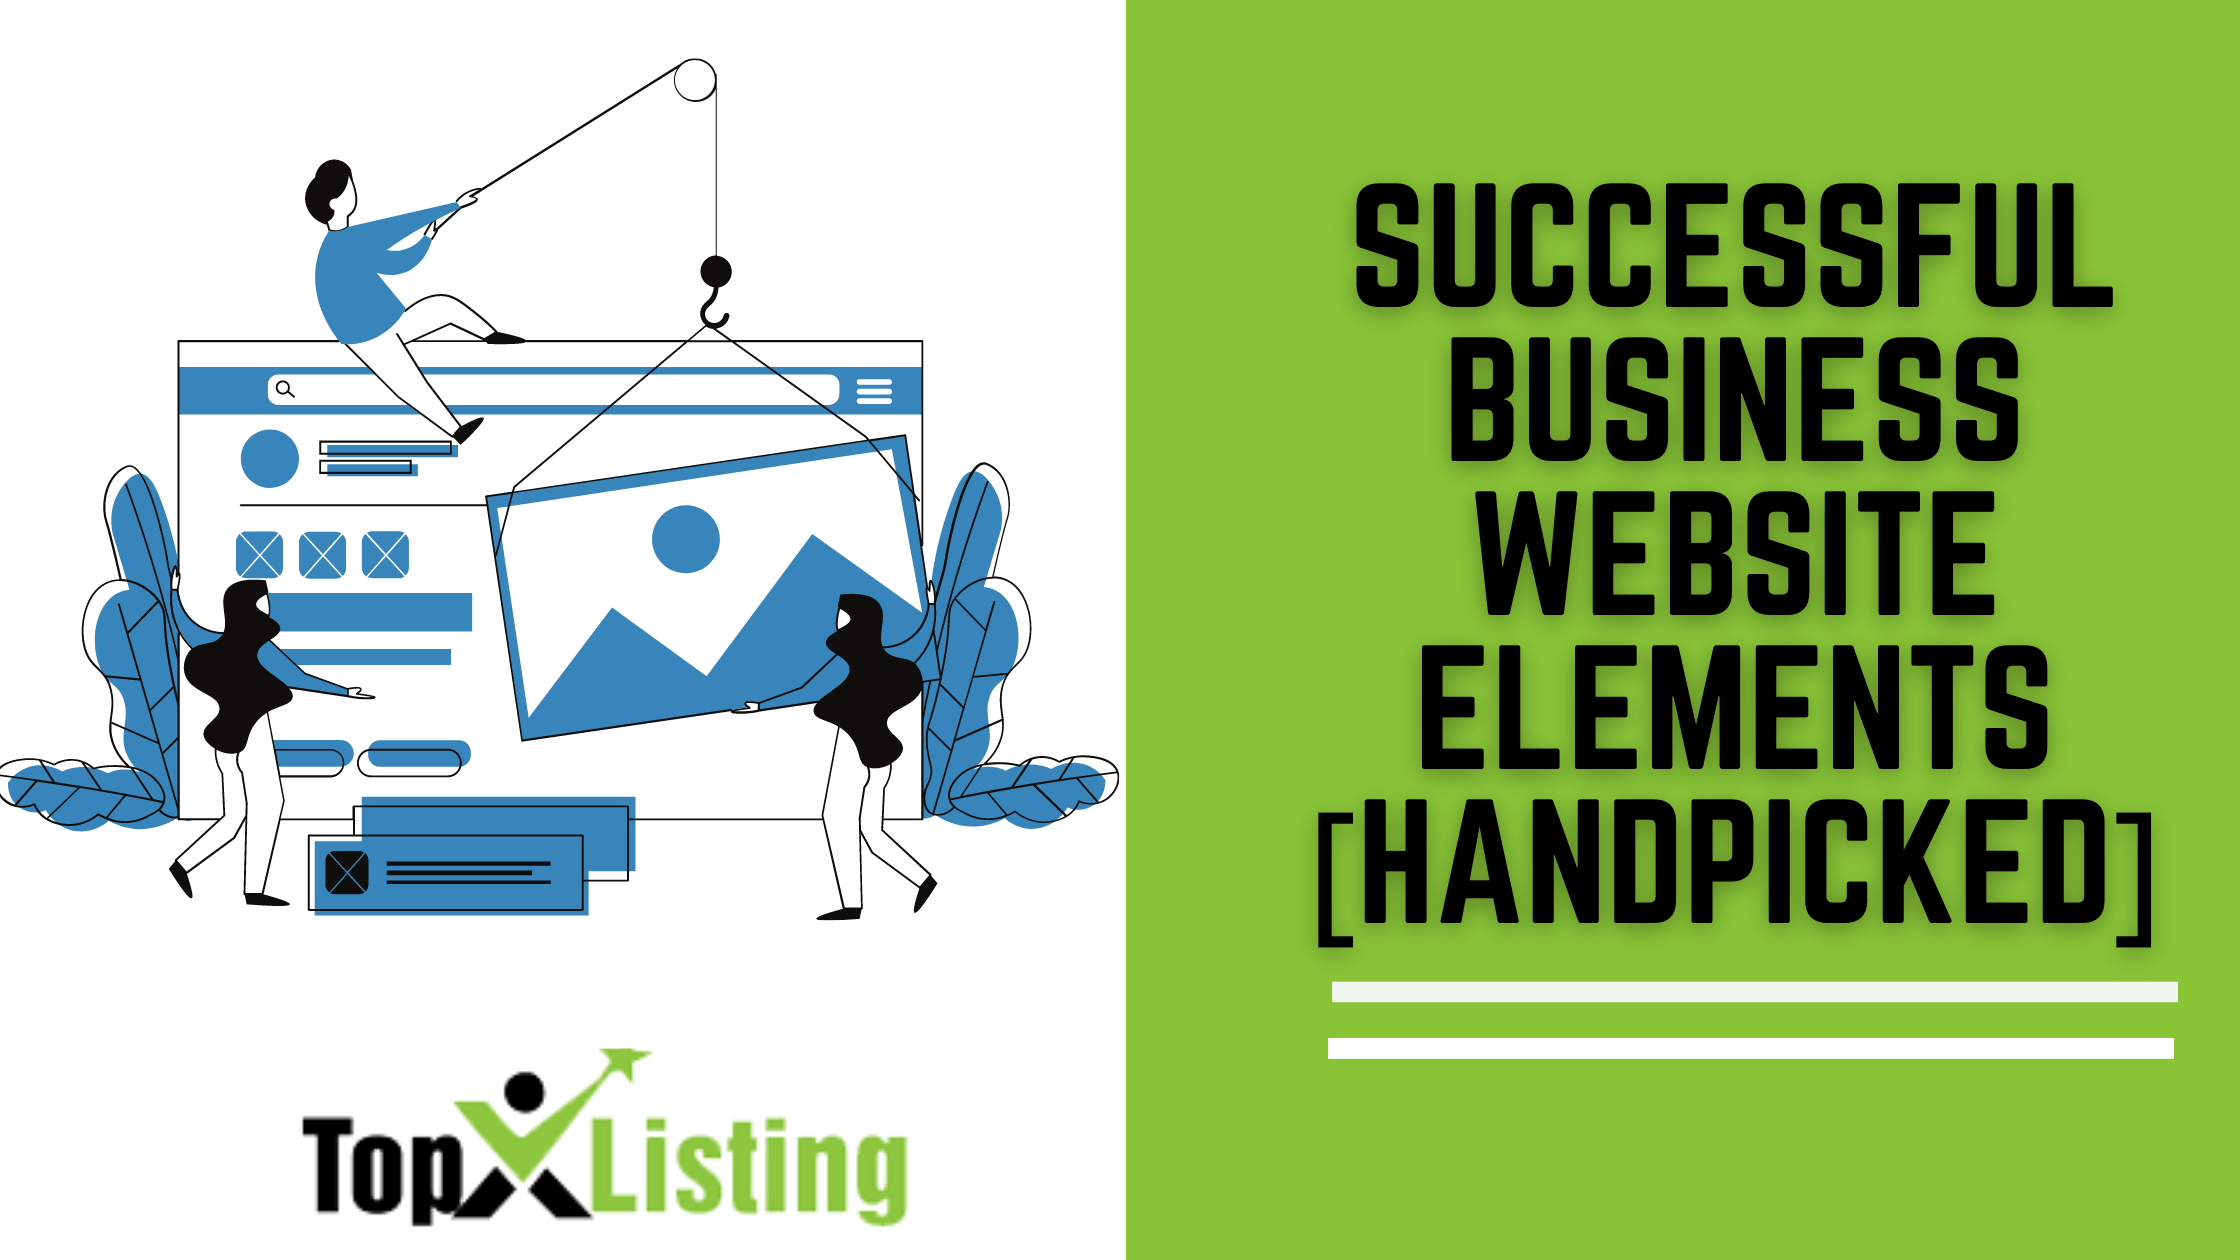 SUCCESSFUL-BUSINESS-WEBSITE-ELEMENTS-HANDPICKED.png